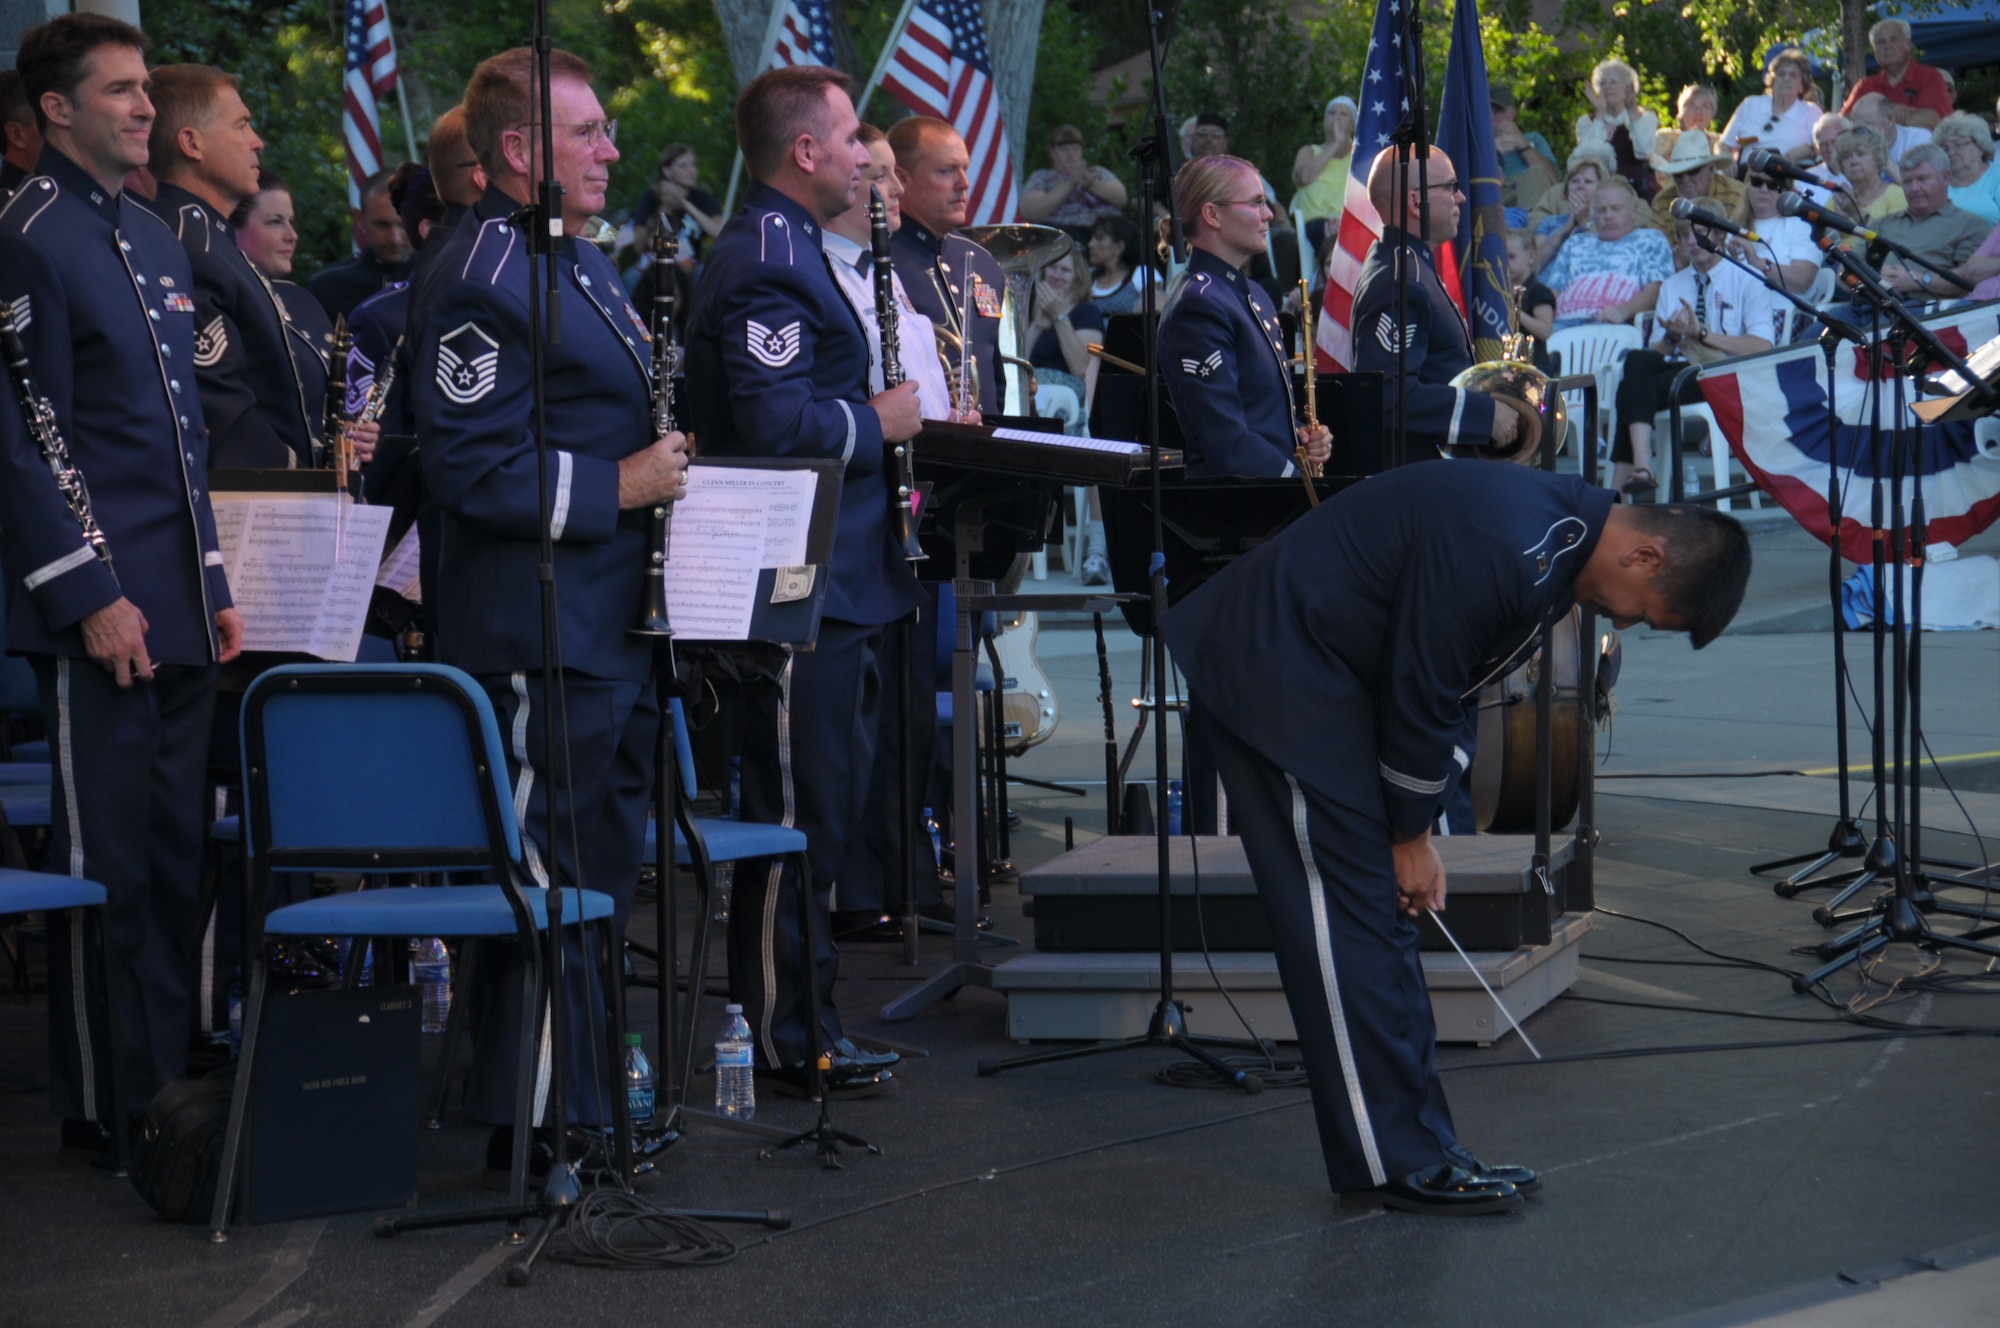 The 562nd Air Force Band of the West Coast finished up a performance at the Ed Kenley Amphitheater in Layton, Utah on June 29, 2014. (U.S. Air National Guard photo by Airman 1st Class Madeleine Richards/Released)



